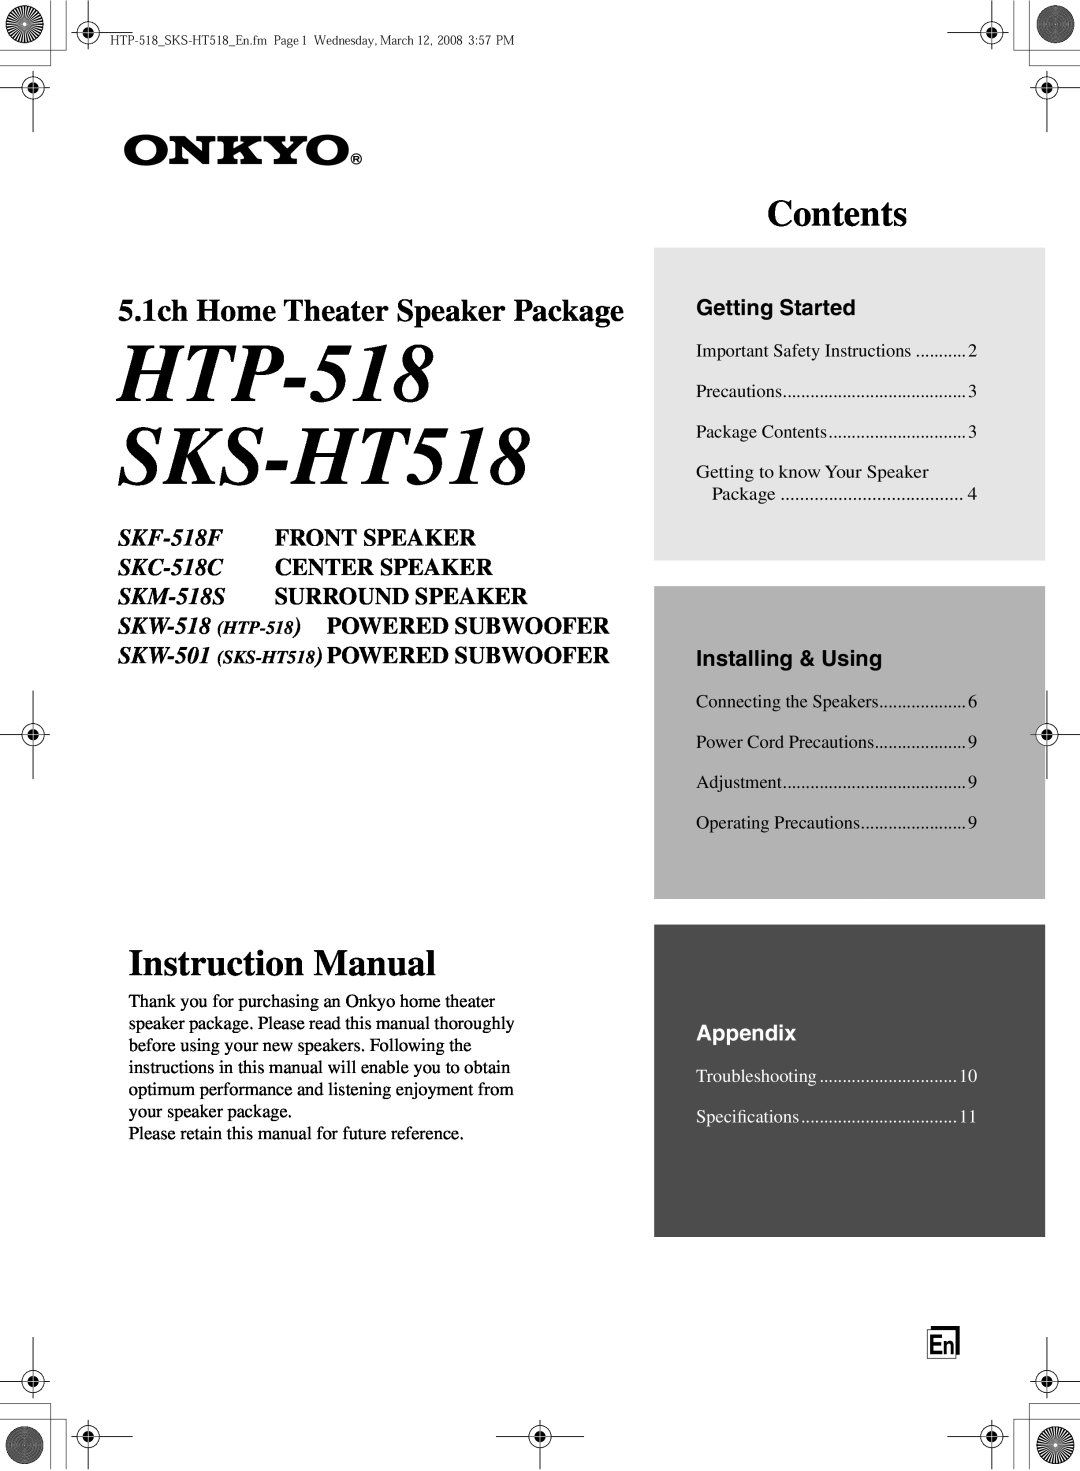 Onkyo SKW-518 instruction manual Getting Started, Installing & Using, HTP-518 SKS-HT518, Contents, SKW-501, Appendix 